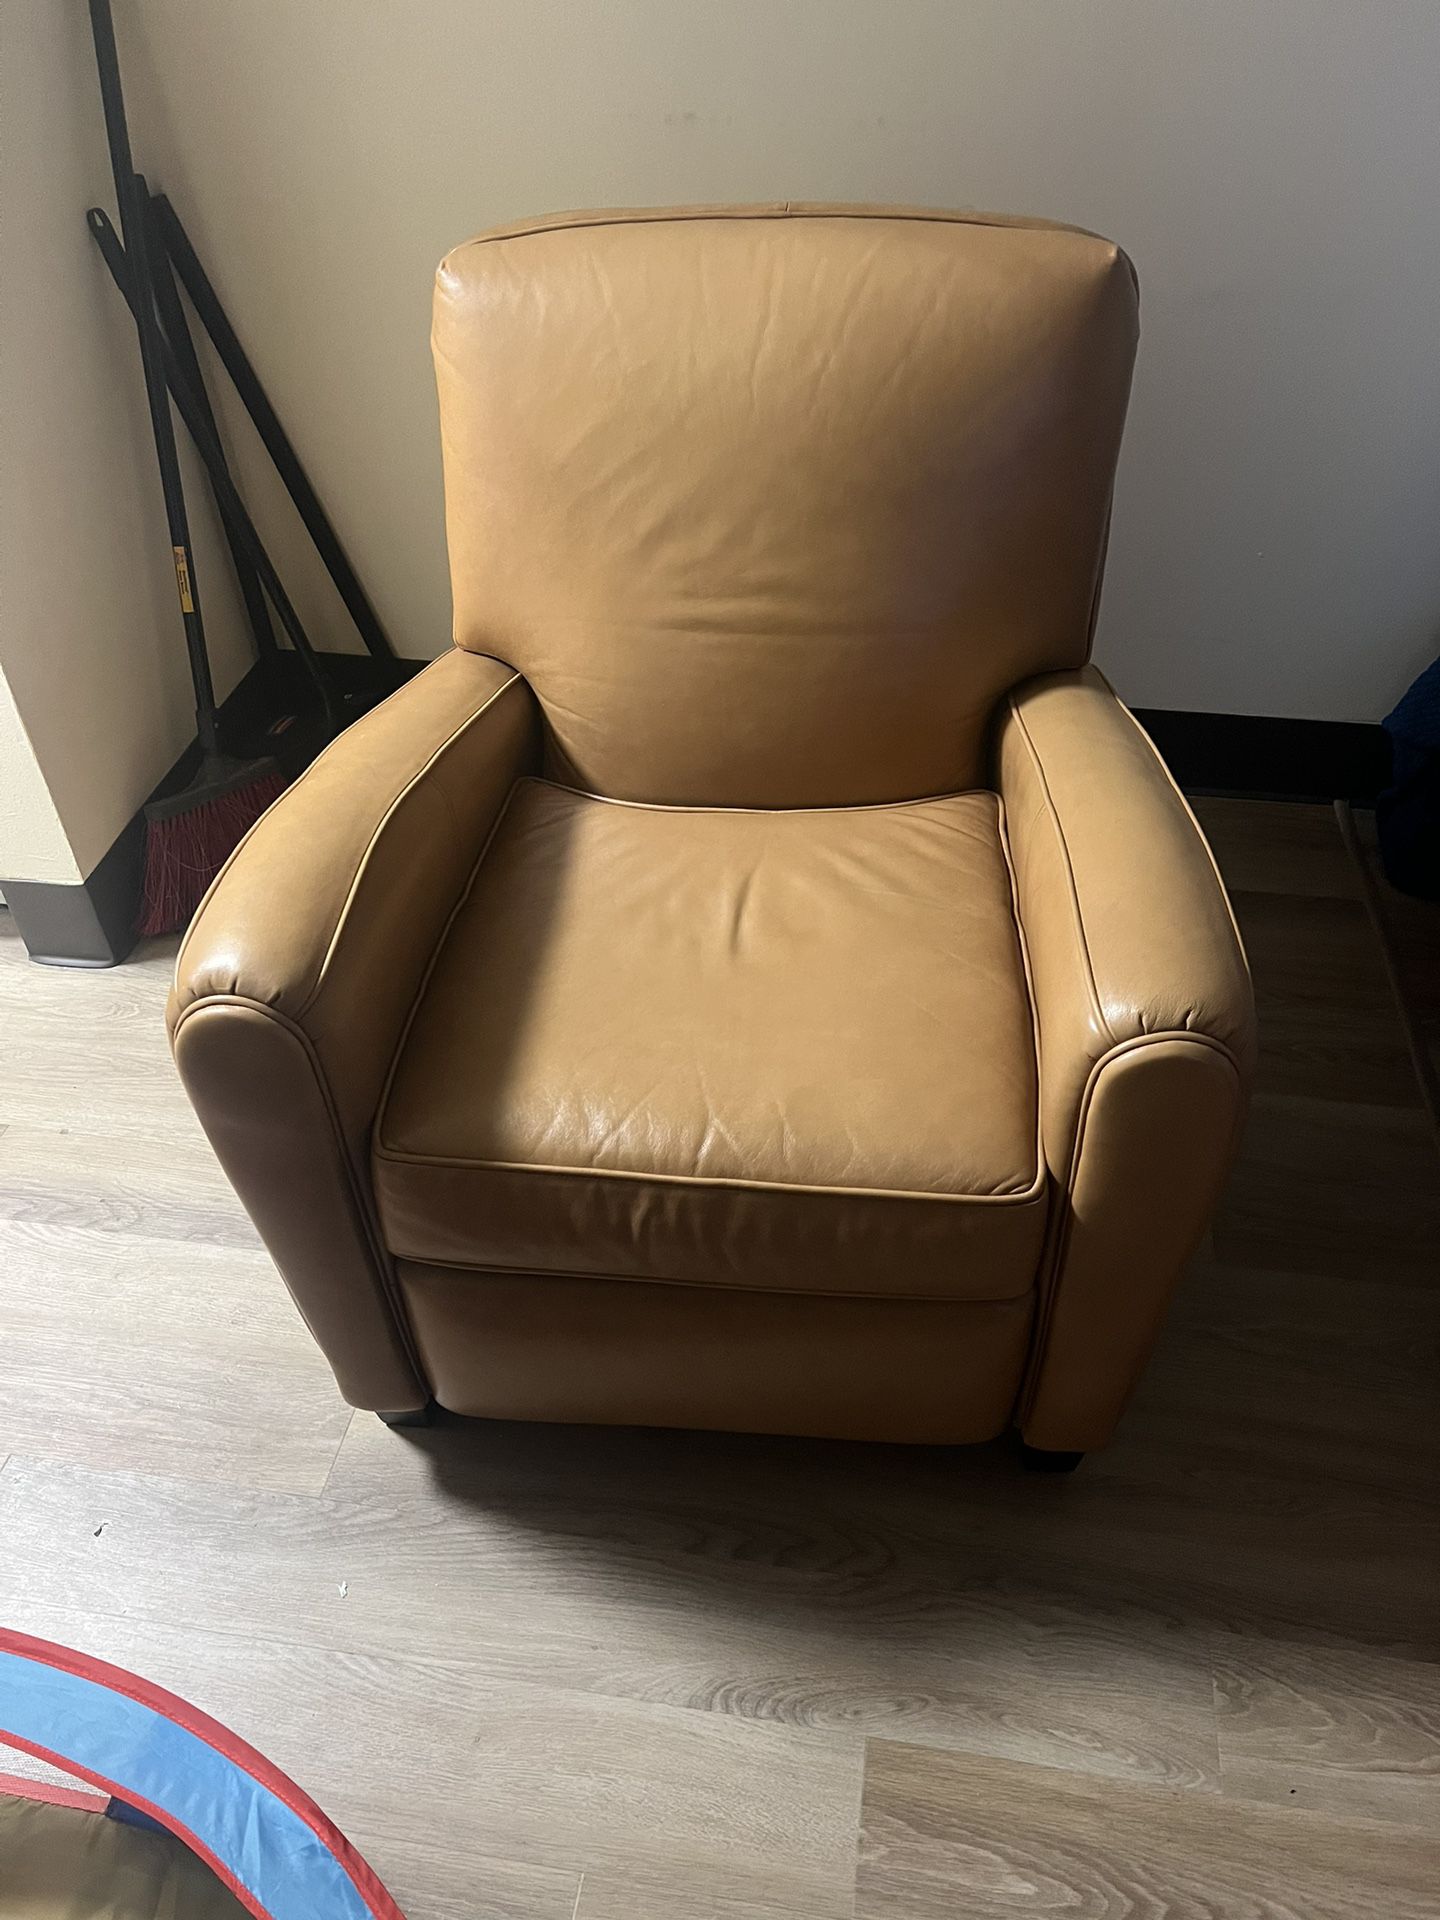 Comfortable Reclining Chair